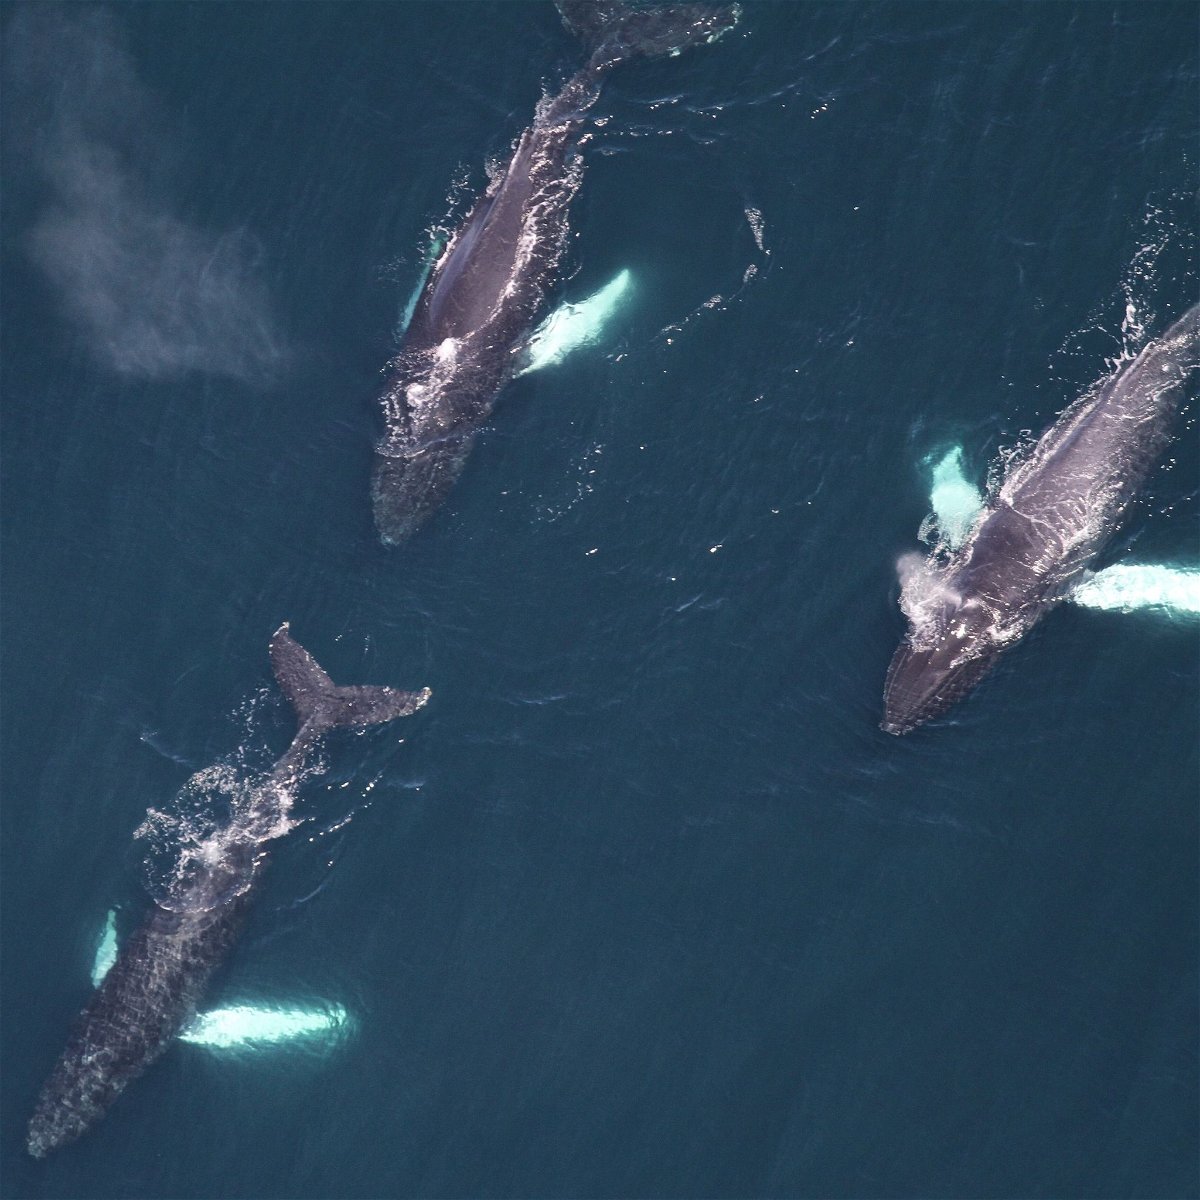 <i>NOAA FISHERIES/WBZ via CNN Newsource</i><br/>The National Oceanic and Atmospheric Administration Fisheries division said researchers reported 161 whale sightings in total on the May 25 flight south of Martha's Vineyard and southeast of Nantucket.